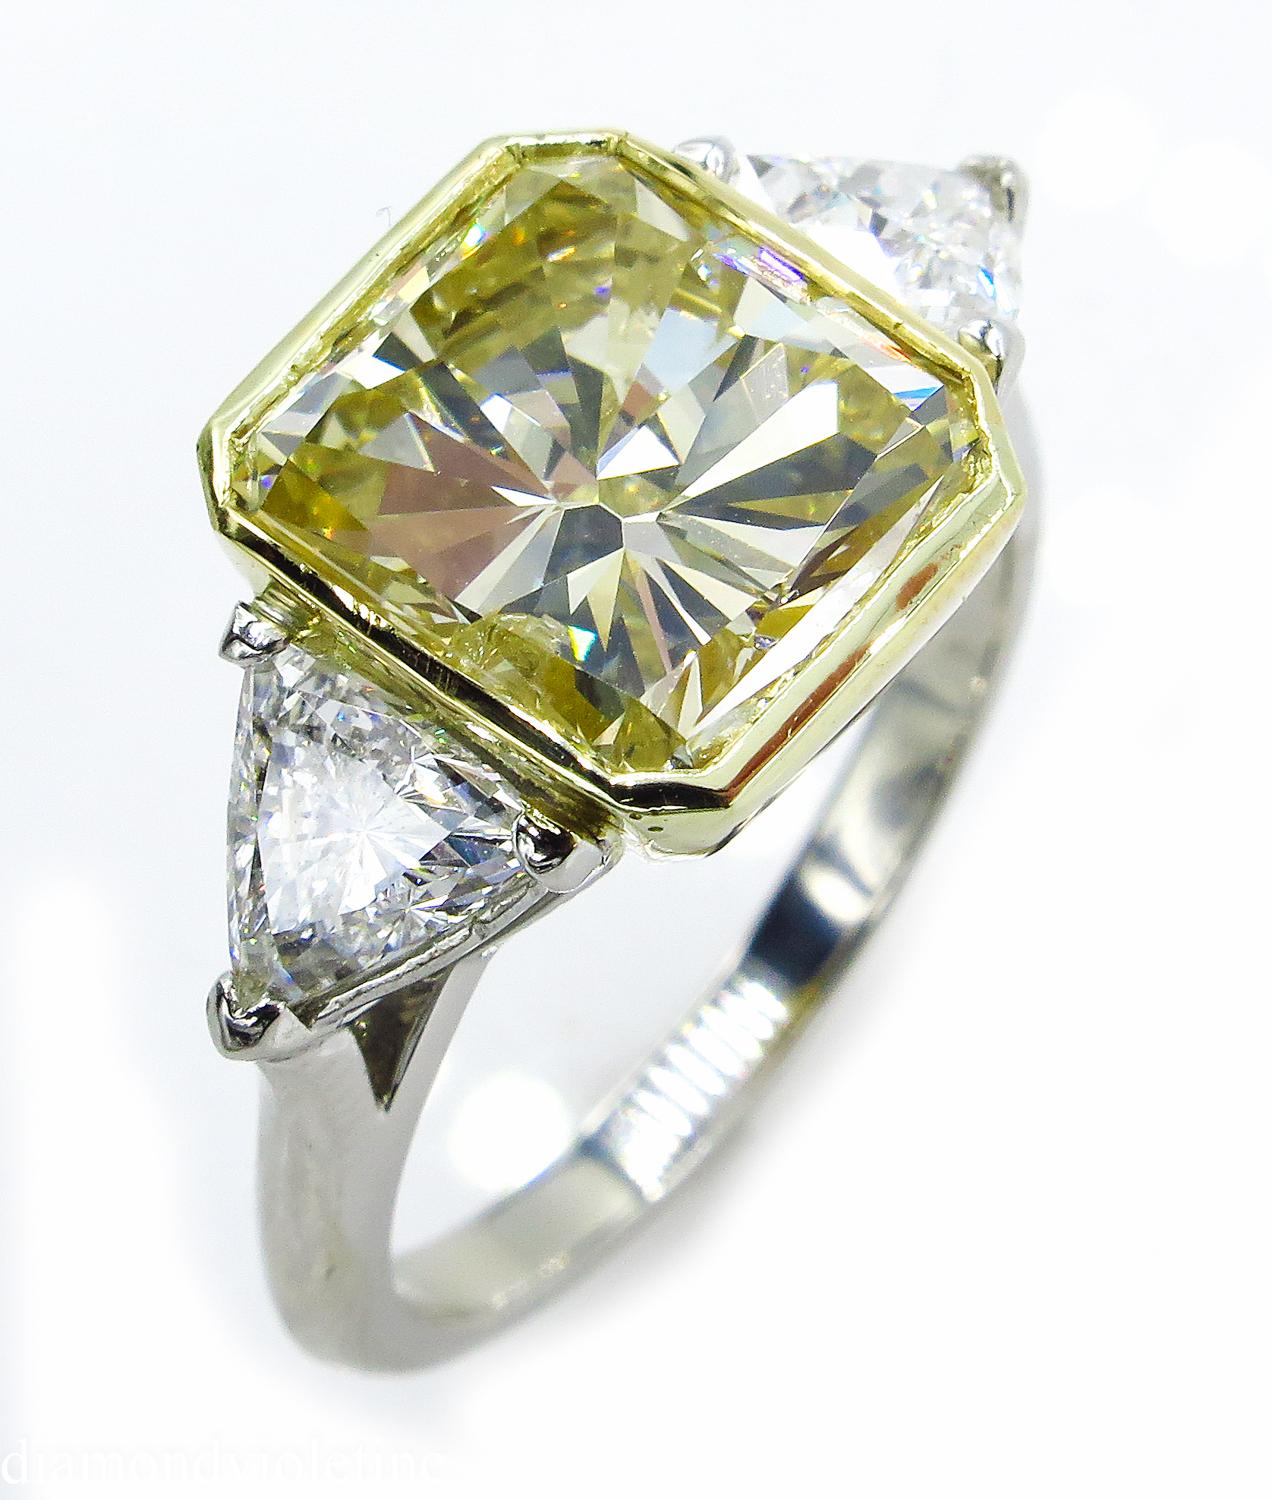 A Breathtaking Estate HANDMADE PLATINUM (tested) Radiant Diamond Three-Stone Engagement ring. The Bezel Set Radiant Diamond is 5.06CT with measurements of 10.50x9.50x6.52mm. EGL USA Certified as Natural Very Light to Light Yellow color and SI3